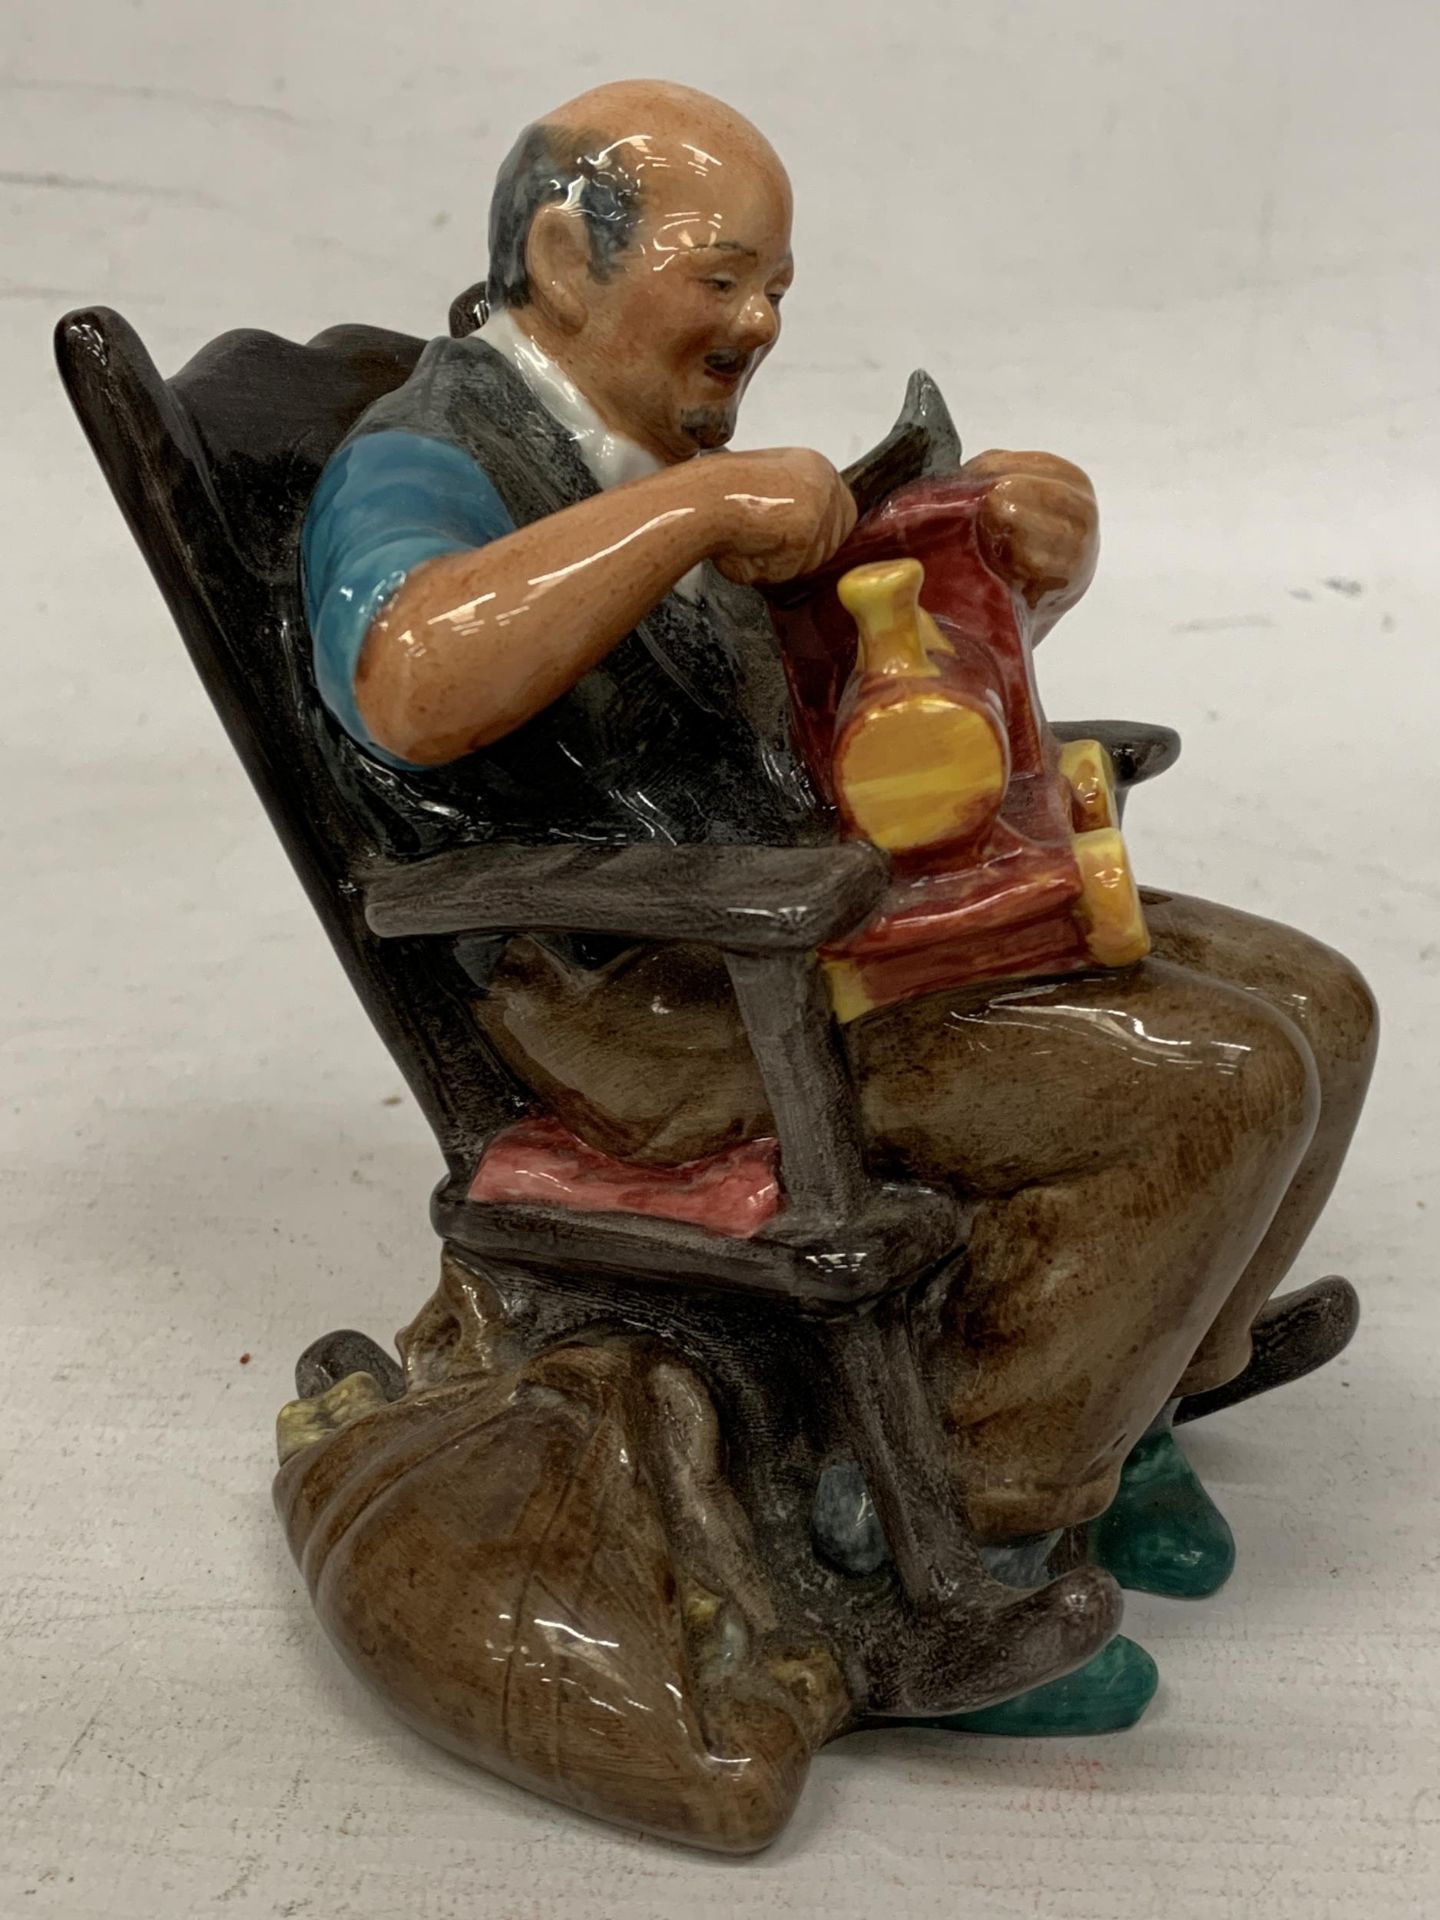 A ROYAL DOULTON FIGURE "THE TOYMAKER" HN 2250 - Image 2 of 5